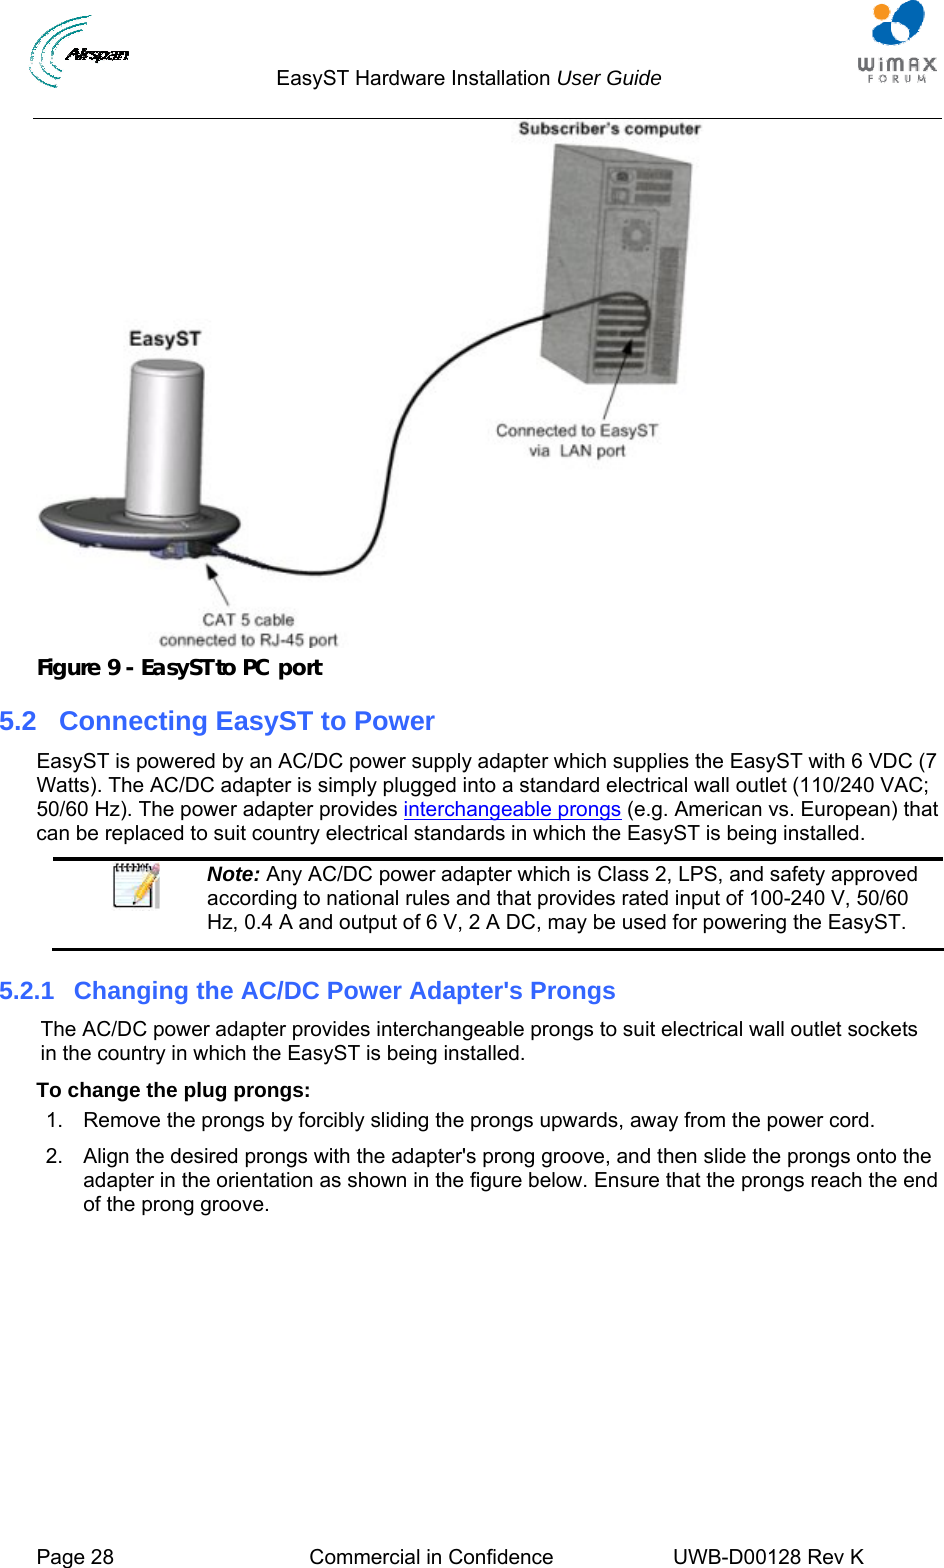                                  EasyST Hardware Installation User Guide     Page 28  Commercial in Confidence  UWB-D00128 Rev K    Figure 9 - EasyST to PC port 5.2  Connecting EasyST to Power EasyST is powered by an AC/DC power supply adapter which supplies the EasyST with 6 VDC (7 Watts). The AC/DC adapter is simply plugged into a standard electrical wall outlet (110/240 VAC; 50/60 Hz). The power adapter provides interchangeable prongs (e.g. American vs. European) that can be replaced to suit country electrical standards in which the EasyST is being installed.  Note: Any AC/DC power adapter which is Class 2, LPS, and safety approved according to national rules and that provides rated input of 100-240 V, 50/60 Hz, 0.4 A and output of 6 V, 2 A DC, may be used for powering the EasyST. 5.2.1 Changing the AC/DC Power Adapter&apos;s Prongs The AC/DC power adapter provides interchangeable prongs to suit electrical wall outlet sockets in the country in which the EasyST is being installed. To change the plug prongs: 1.  Remove the prongs by forcibly sliding the prongs upwards, away from the power cord. 2.  Align the desired prongs with the adapter&apos;s prong groove, and then slide the prongs onto the adapter in the orientation as shown in the figure below. Ensure that the prongs reach the end of the prong groove. 